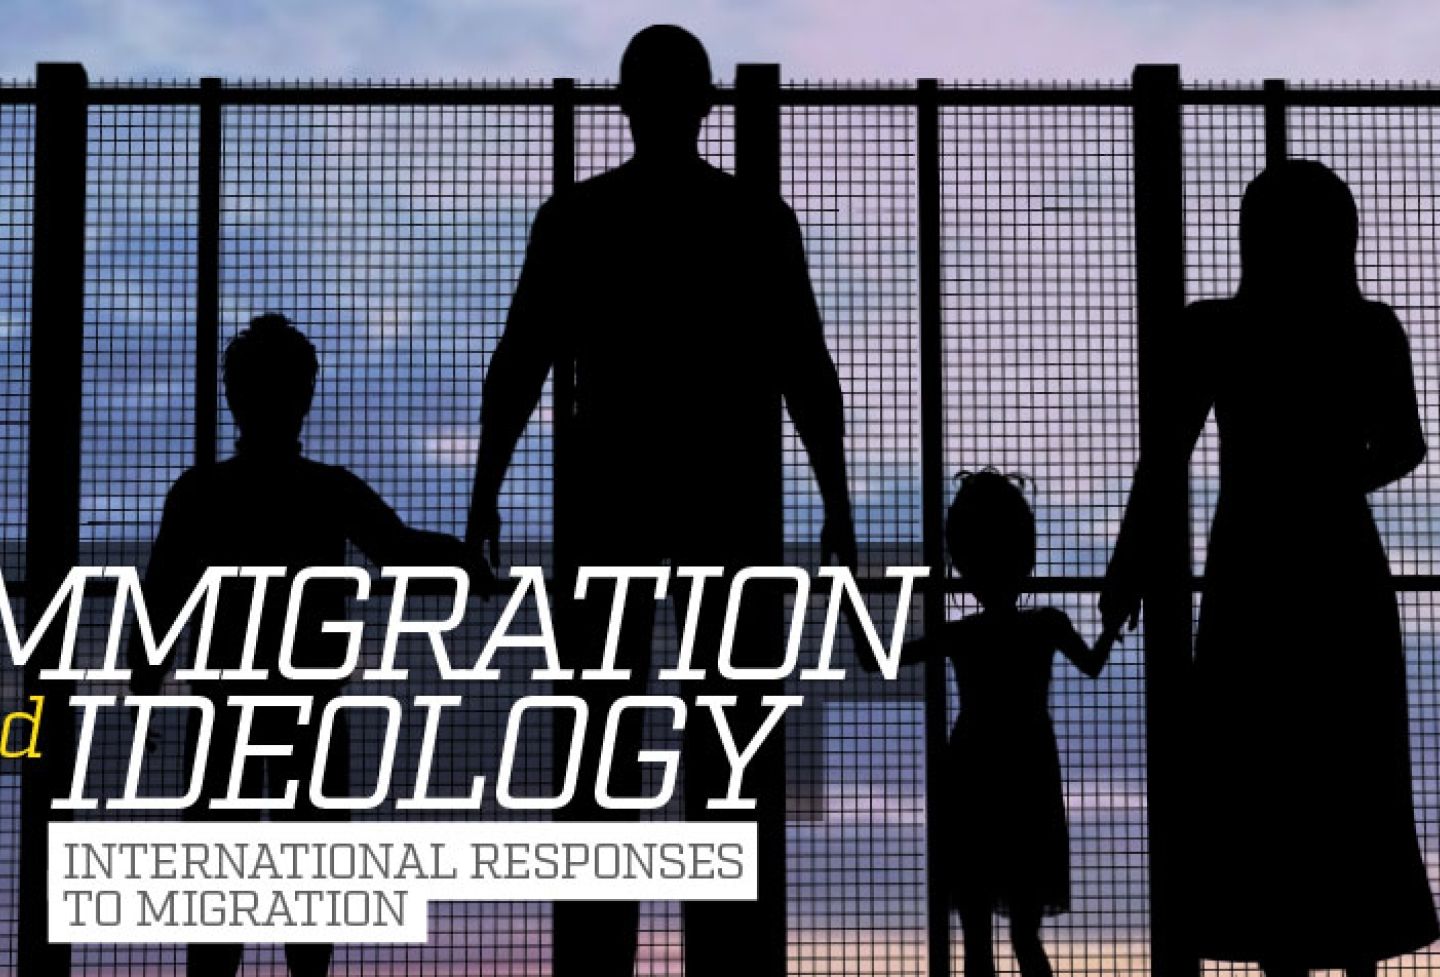 Immigration and Ideology: International Responses to Migration